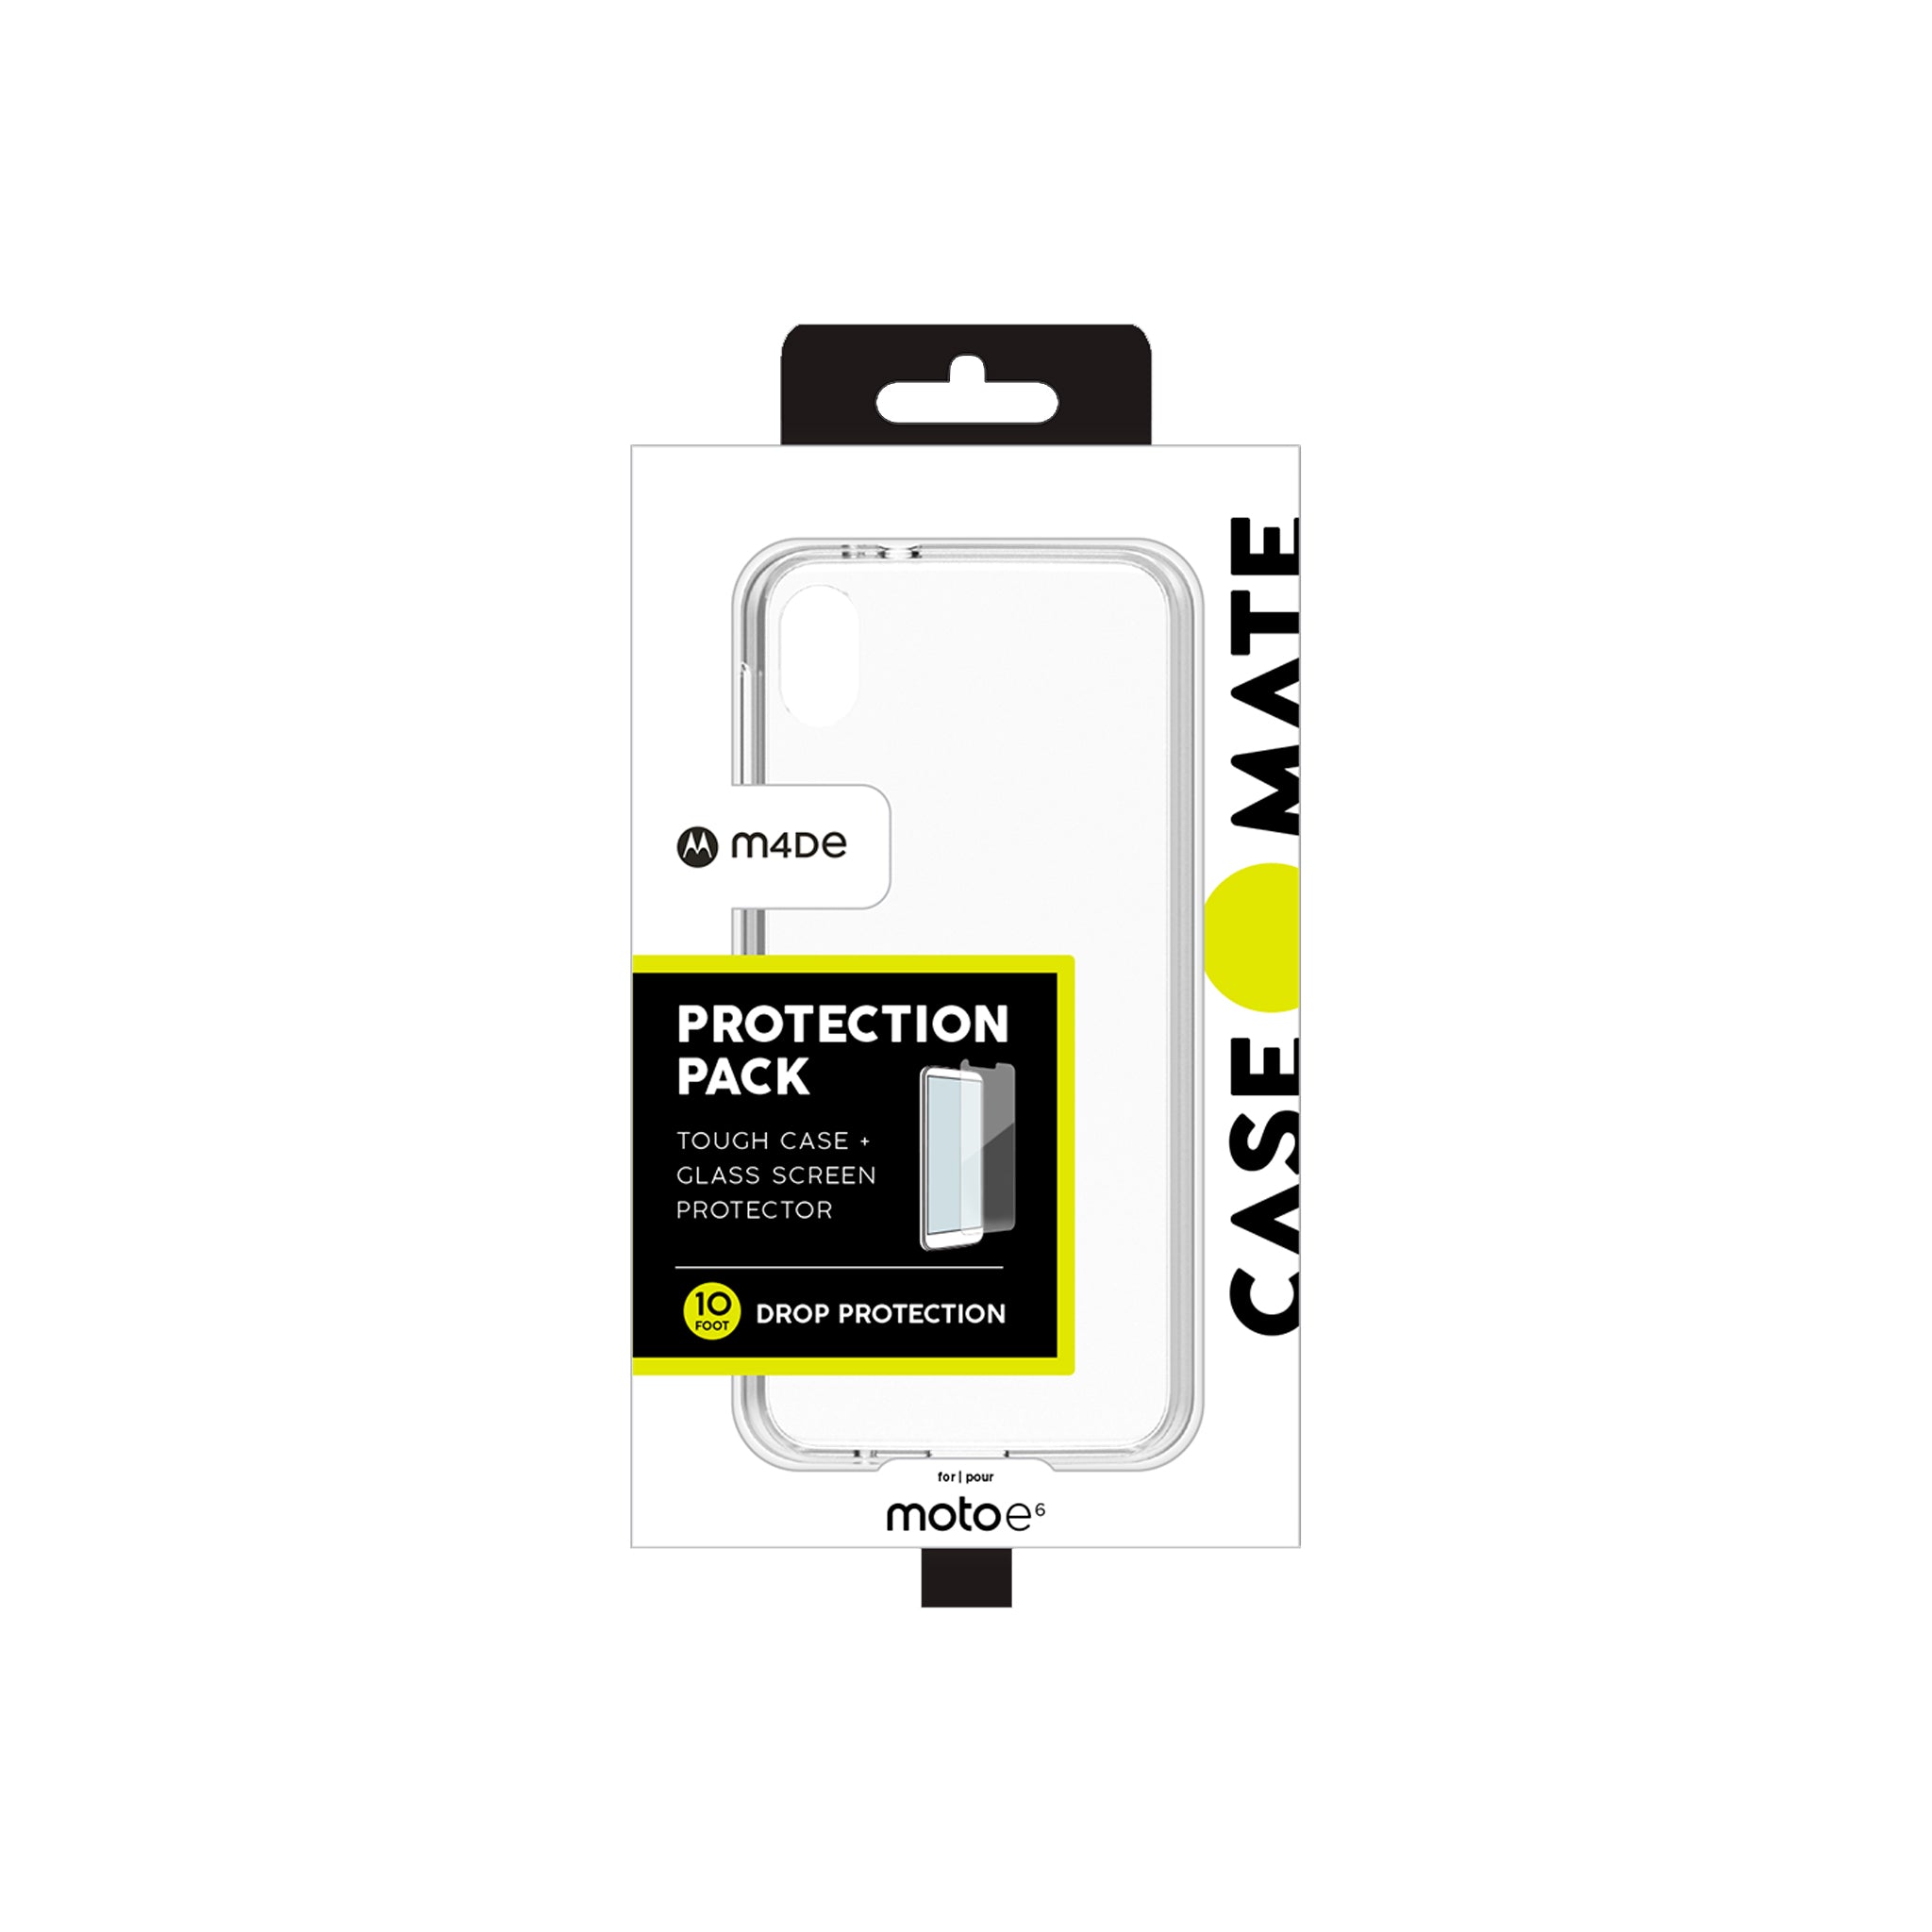 Case-mate - Protection Pack Tough Case And Glass Screen Protector For Motorola Moto E6 - Clear